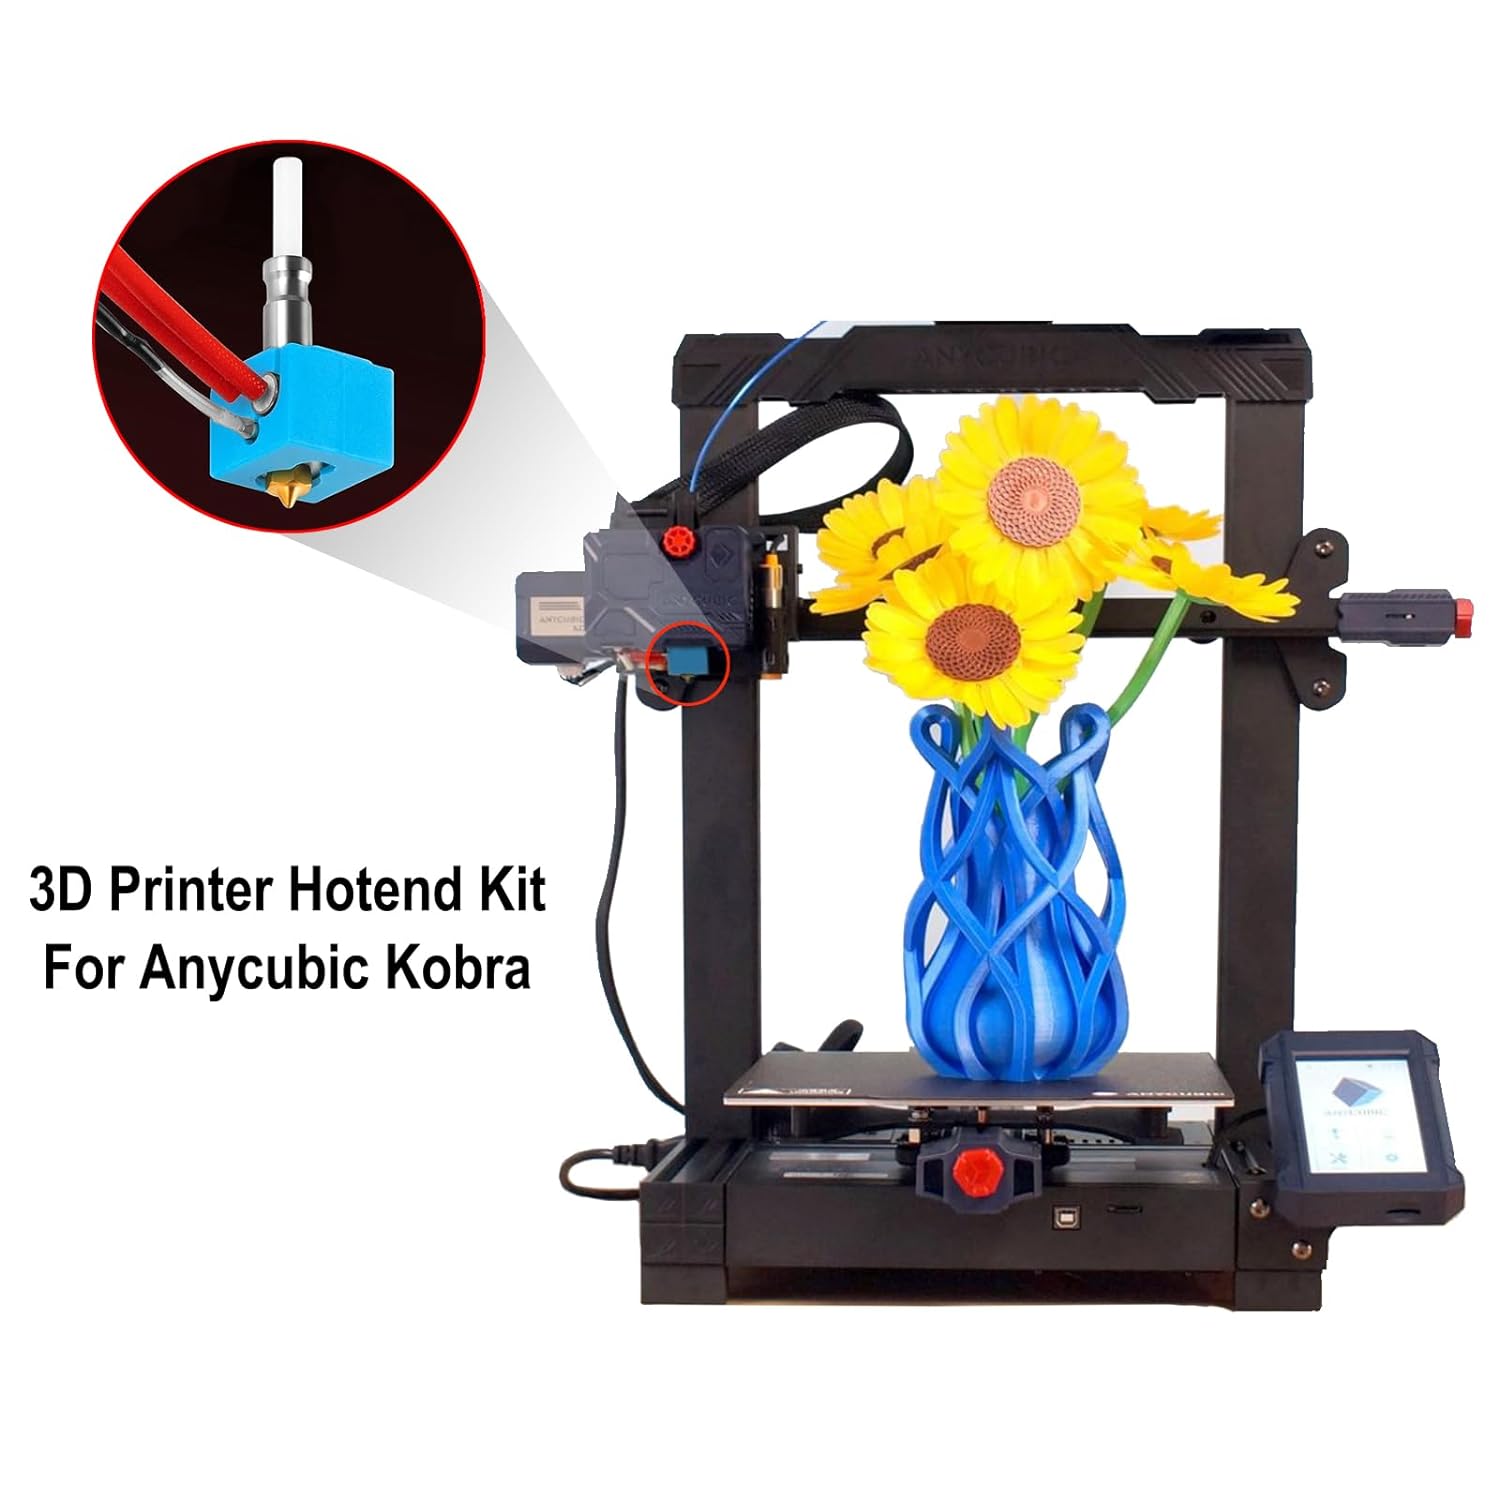 3d-printer-hotend-kit-for-anycubic-vyper-3d-printer-accessories-replacement-print-head-kit-with-5pcs-silicone-socks-and-1-4 3D Printer Hotend Kit for Anycubic Vyper Review